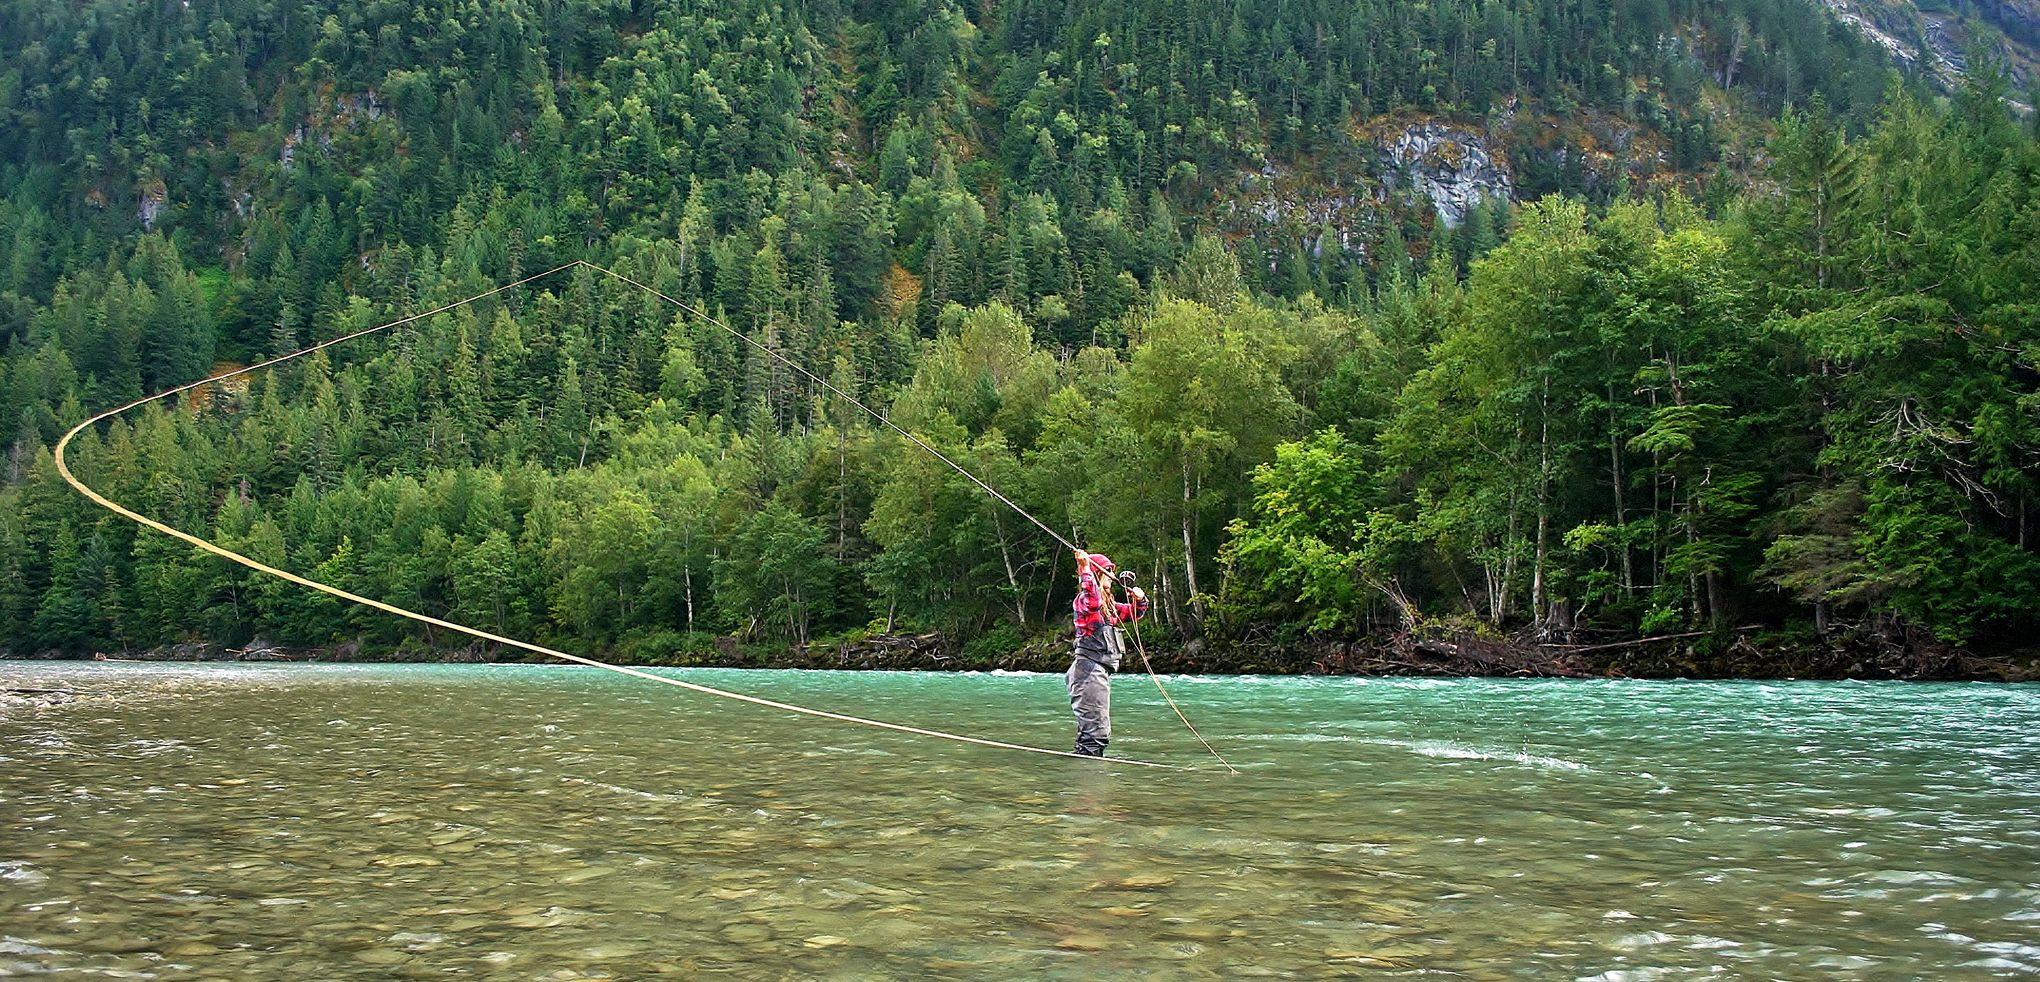 Fly-fishing industry discovers women